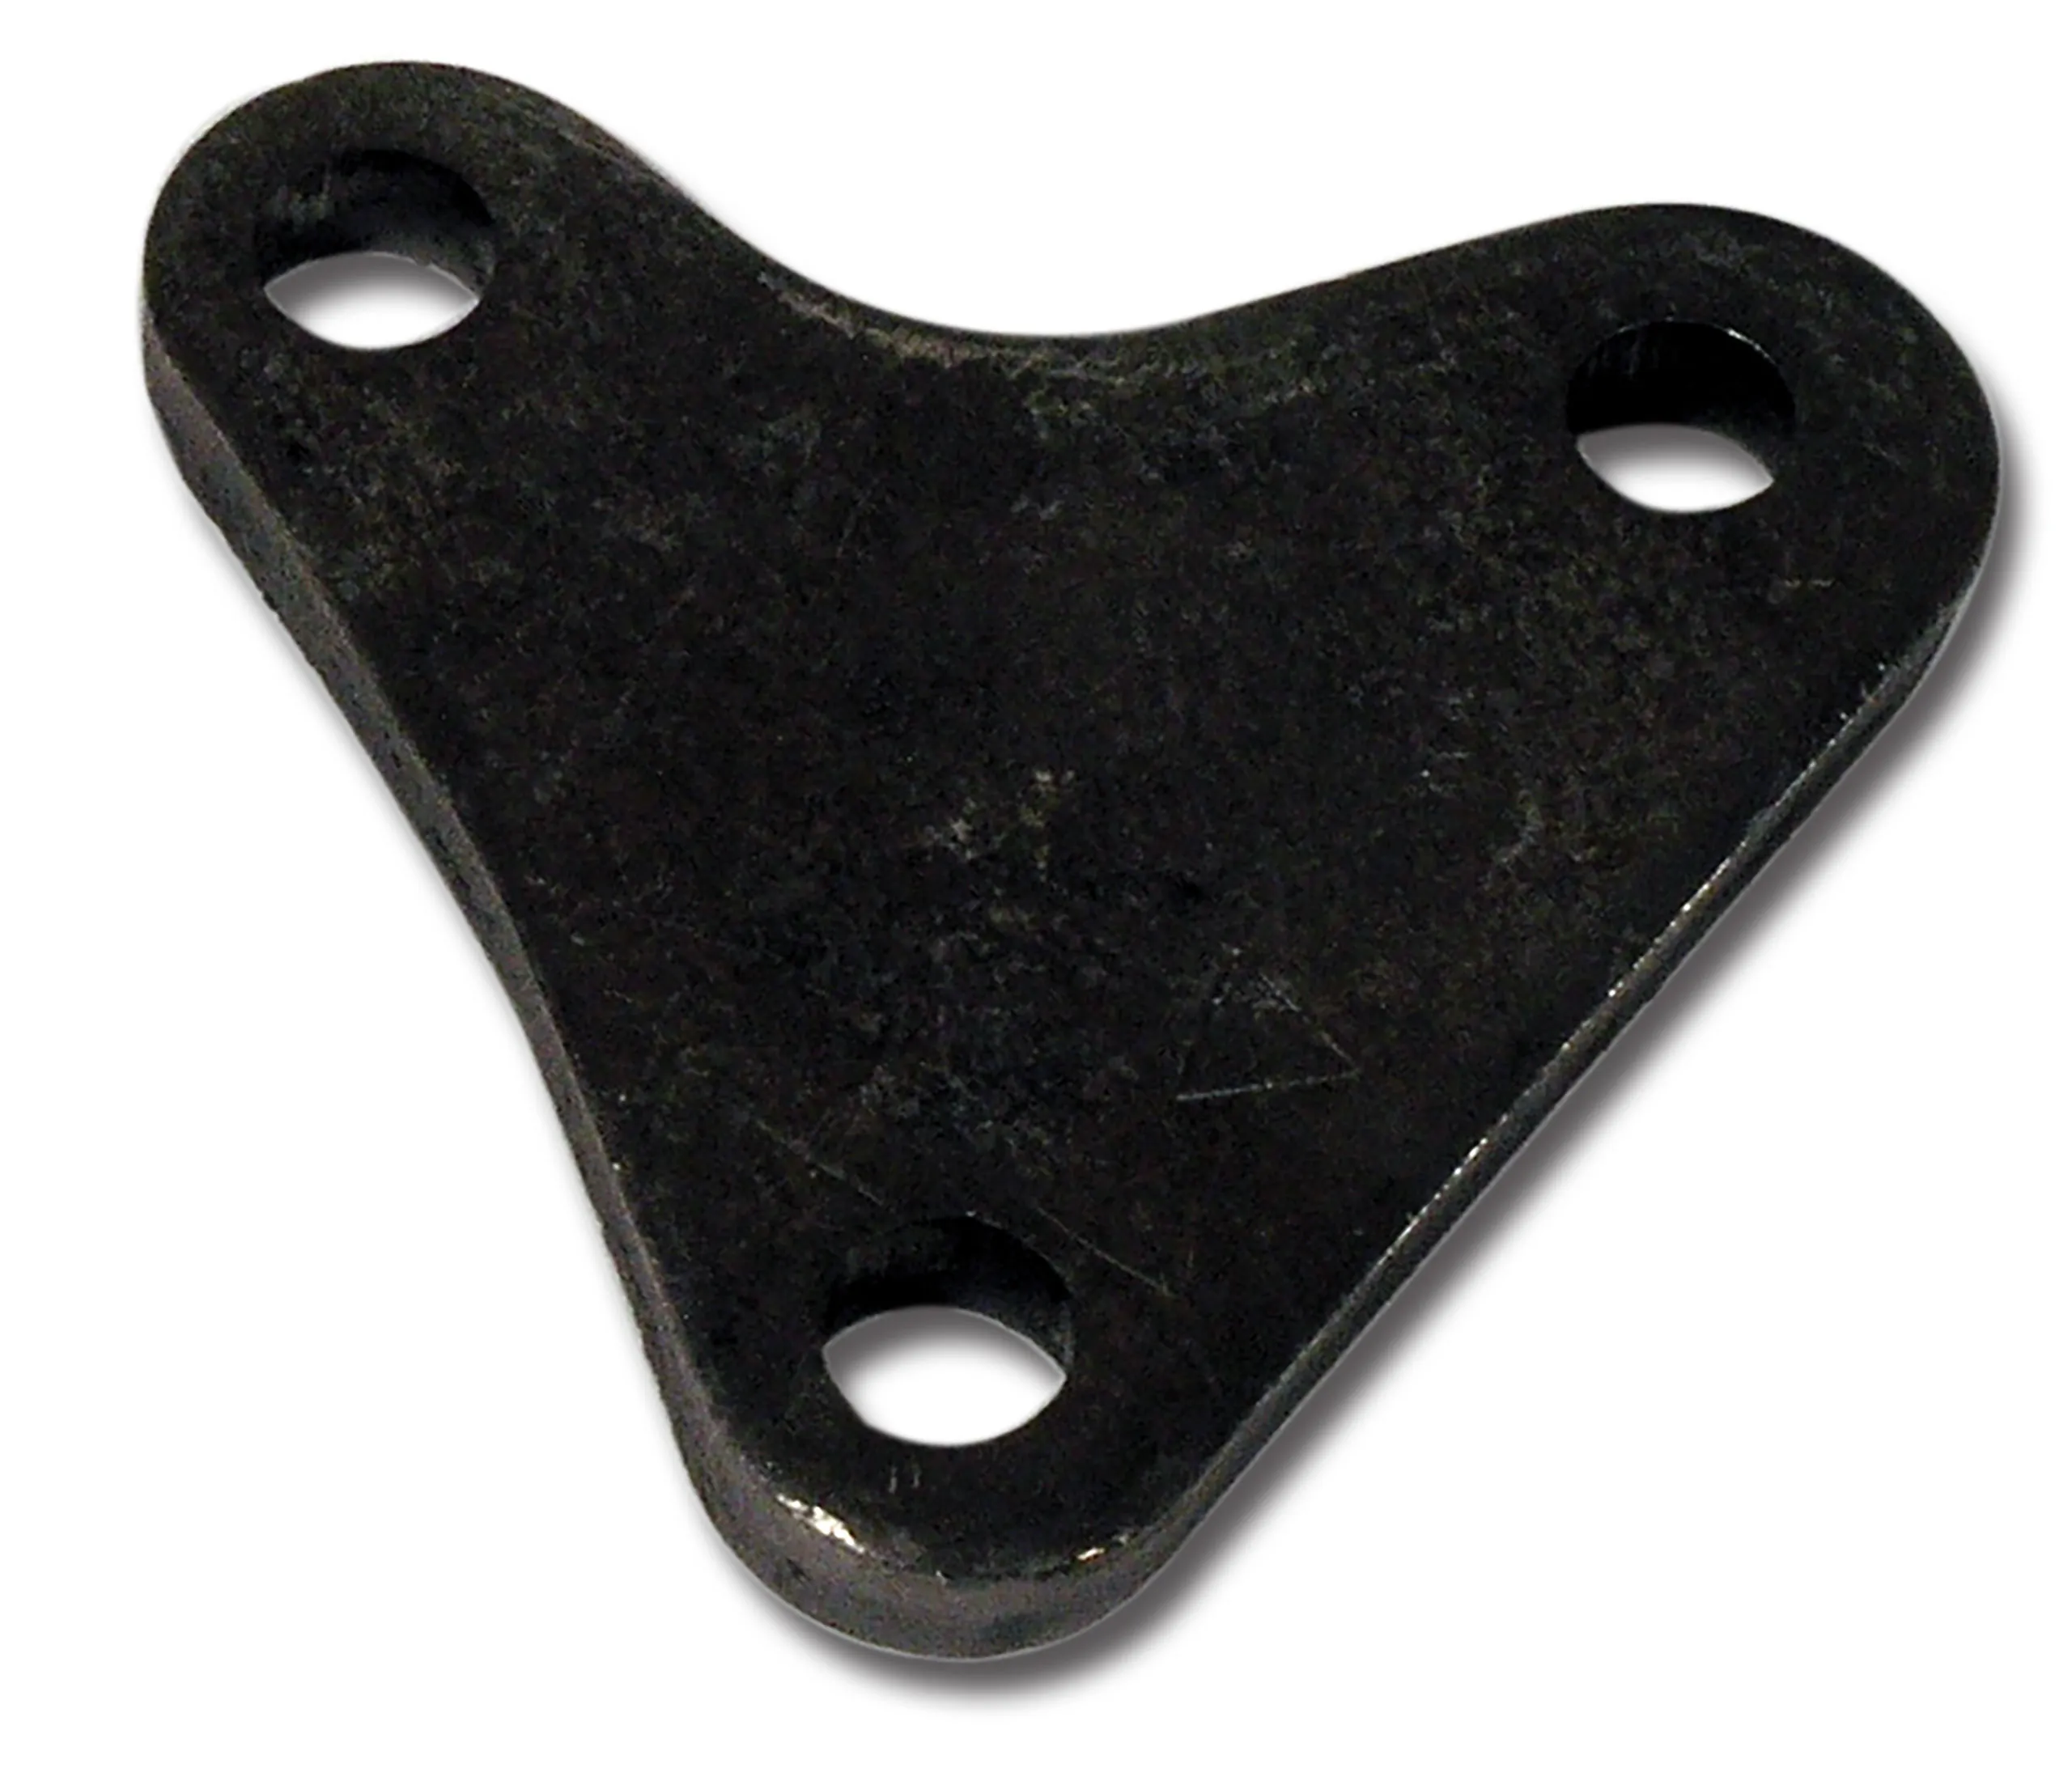 1964-1976 Chevrolet Corvette Air Conditioner Compressor Bracket. Rear 327/350 - Old Air Products